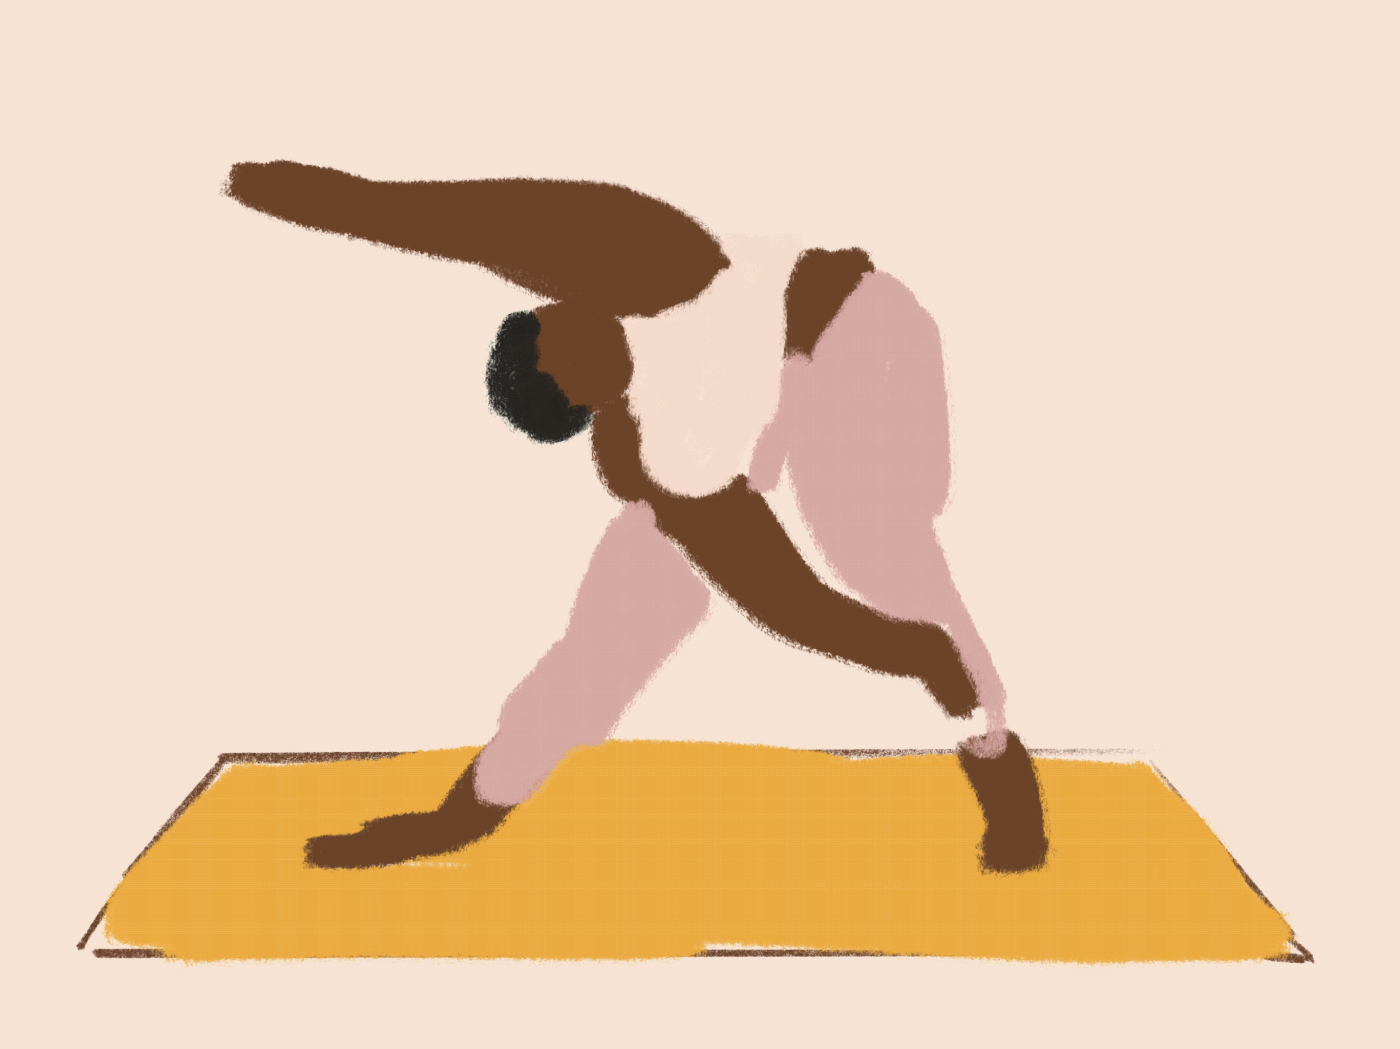 2DAnimation Bodies in Motion frame by frame procreate animation real bodies workout Yoga